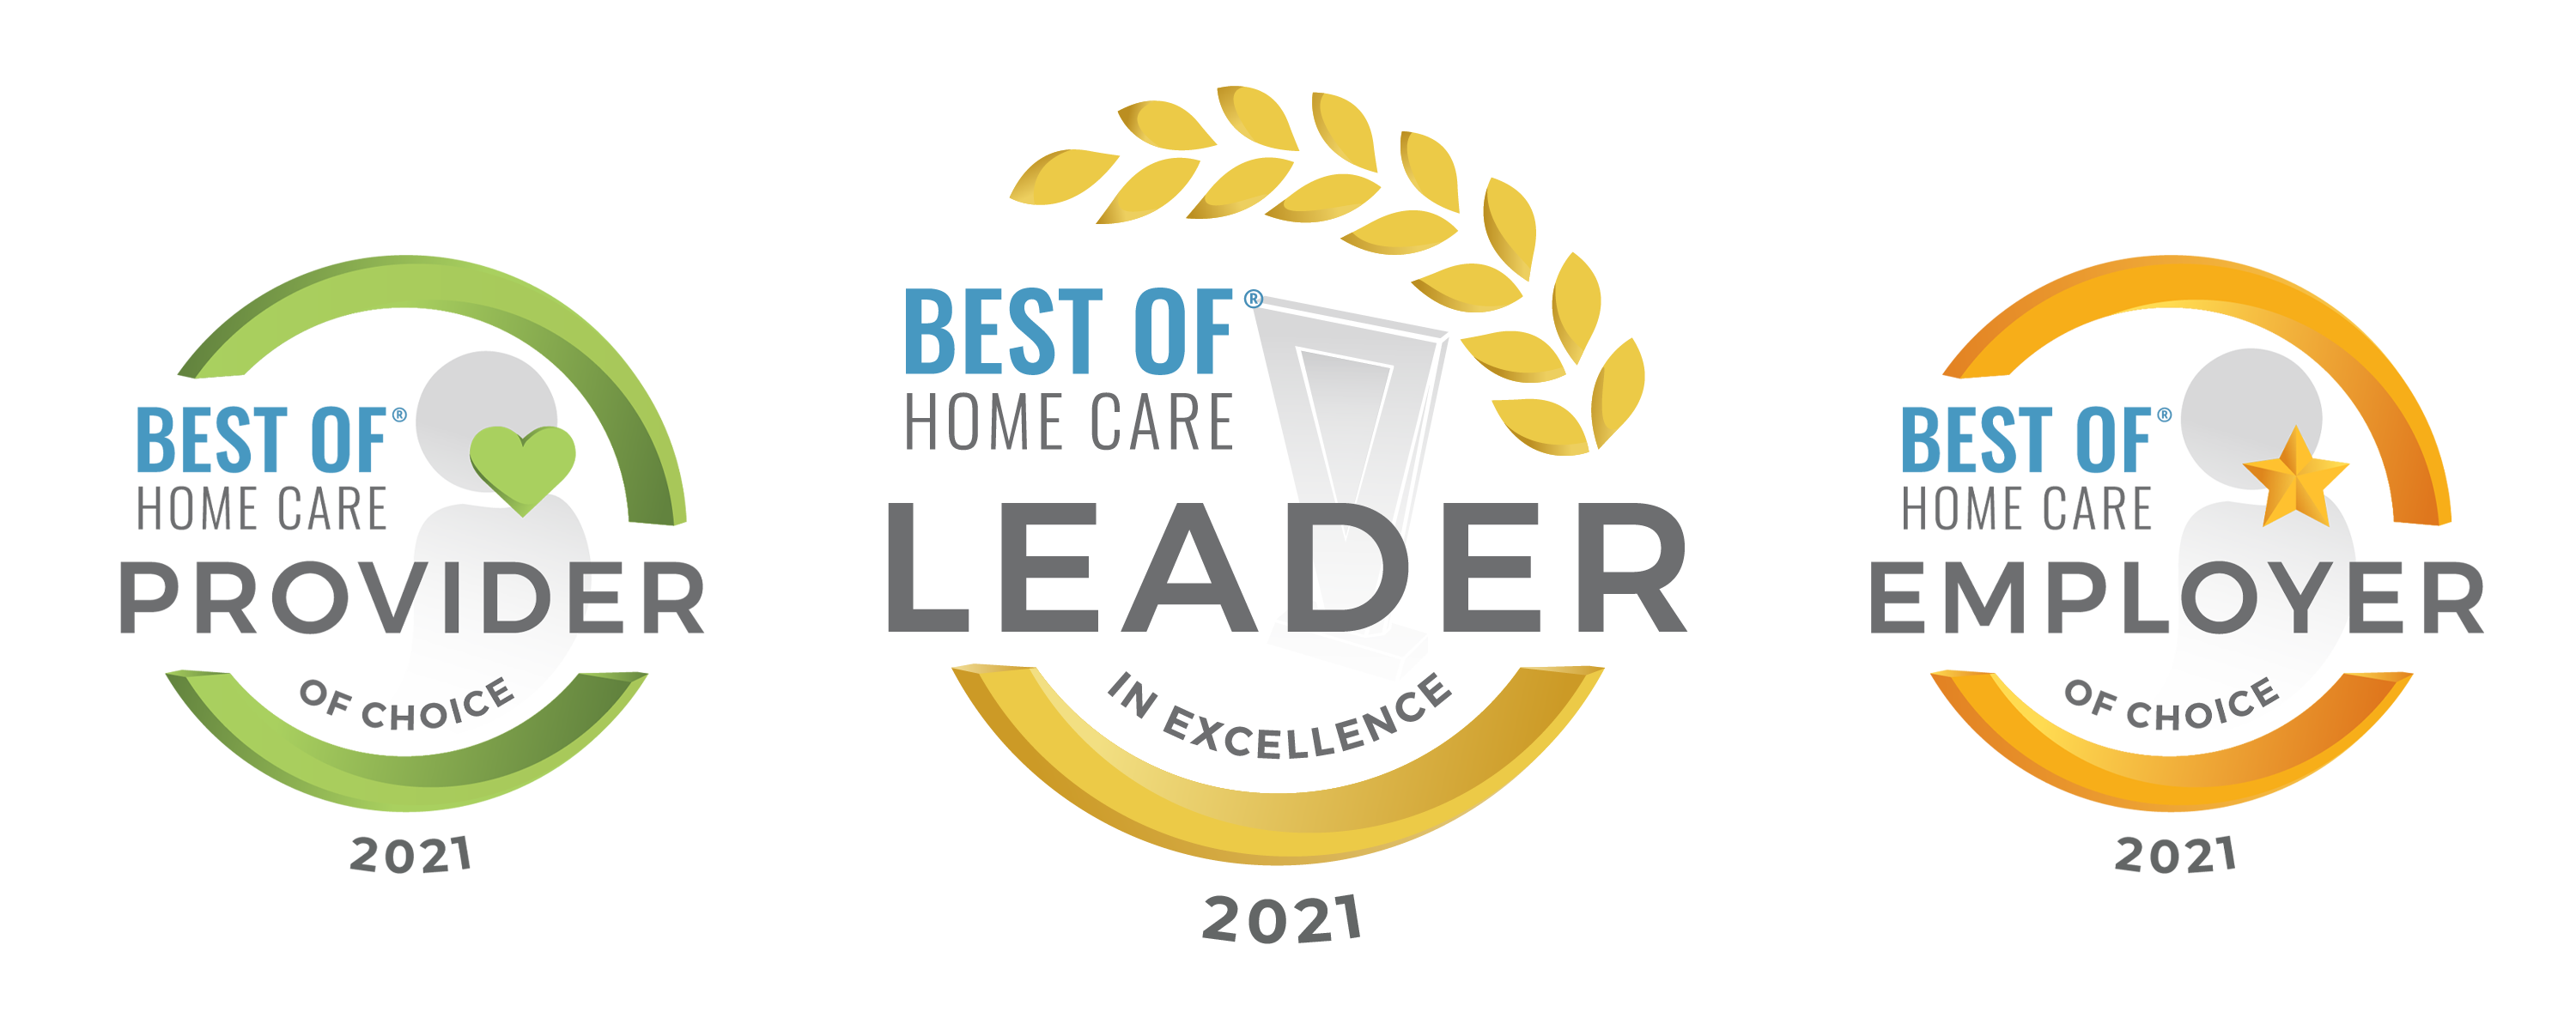 2021 - Best of Home Care - Leader in Excellence